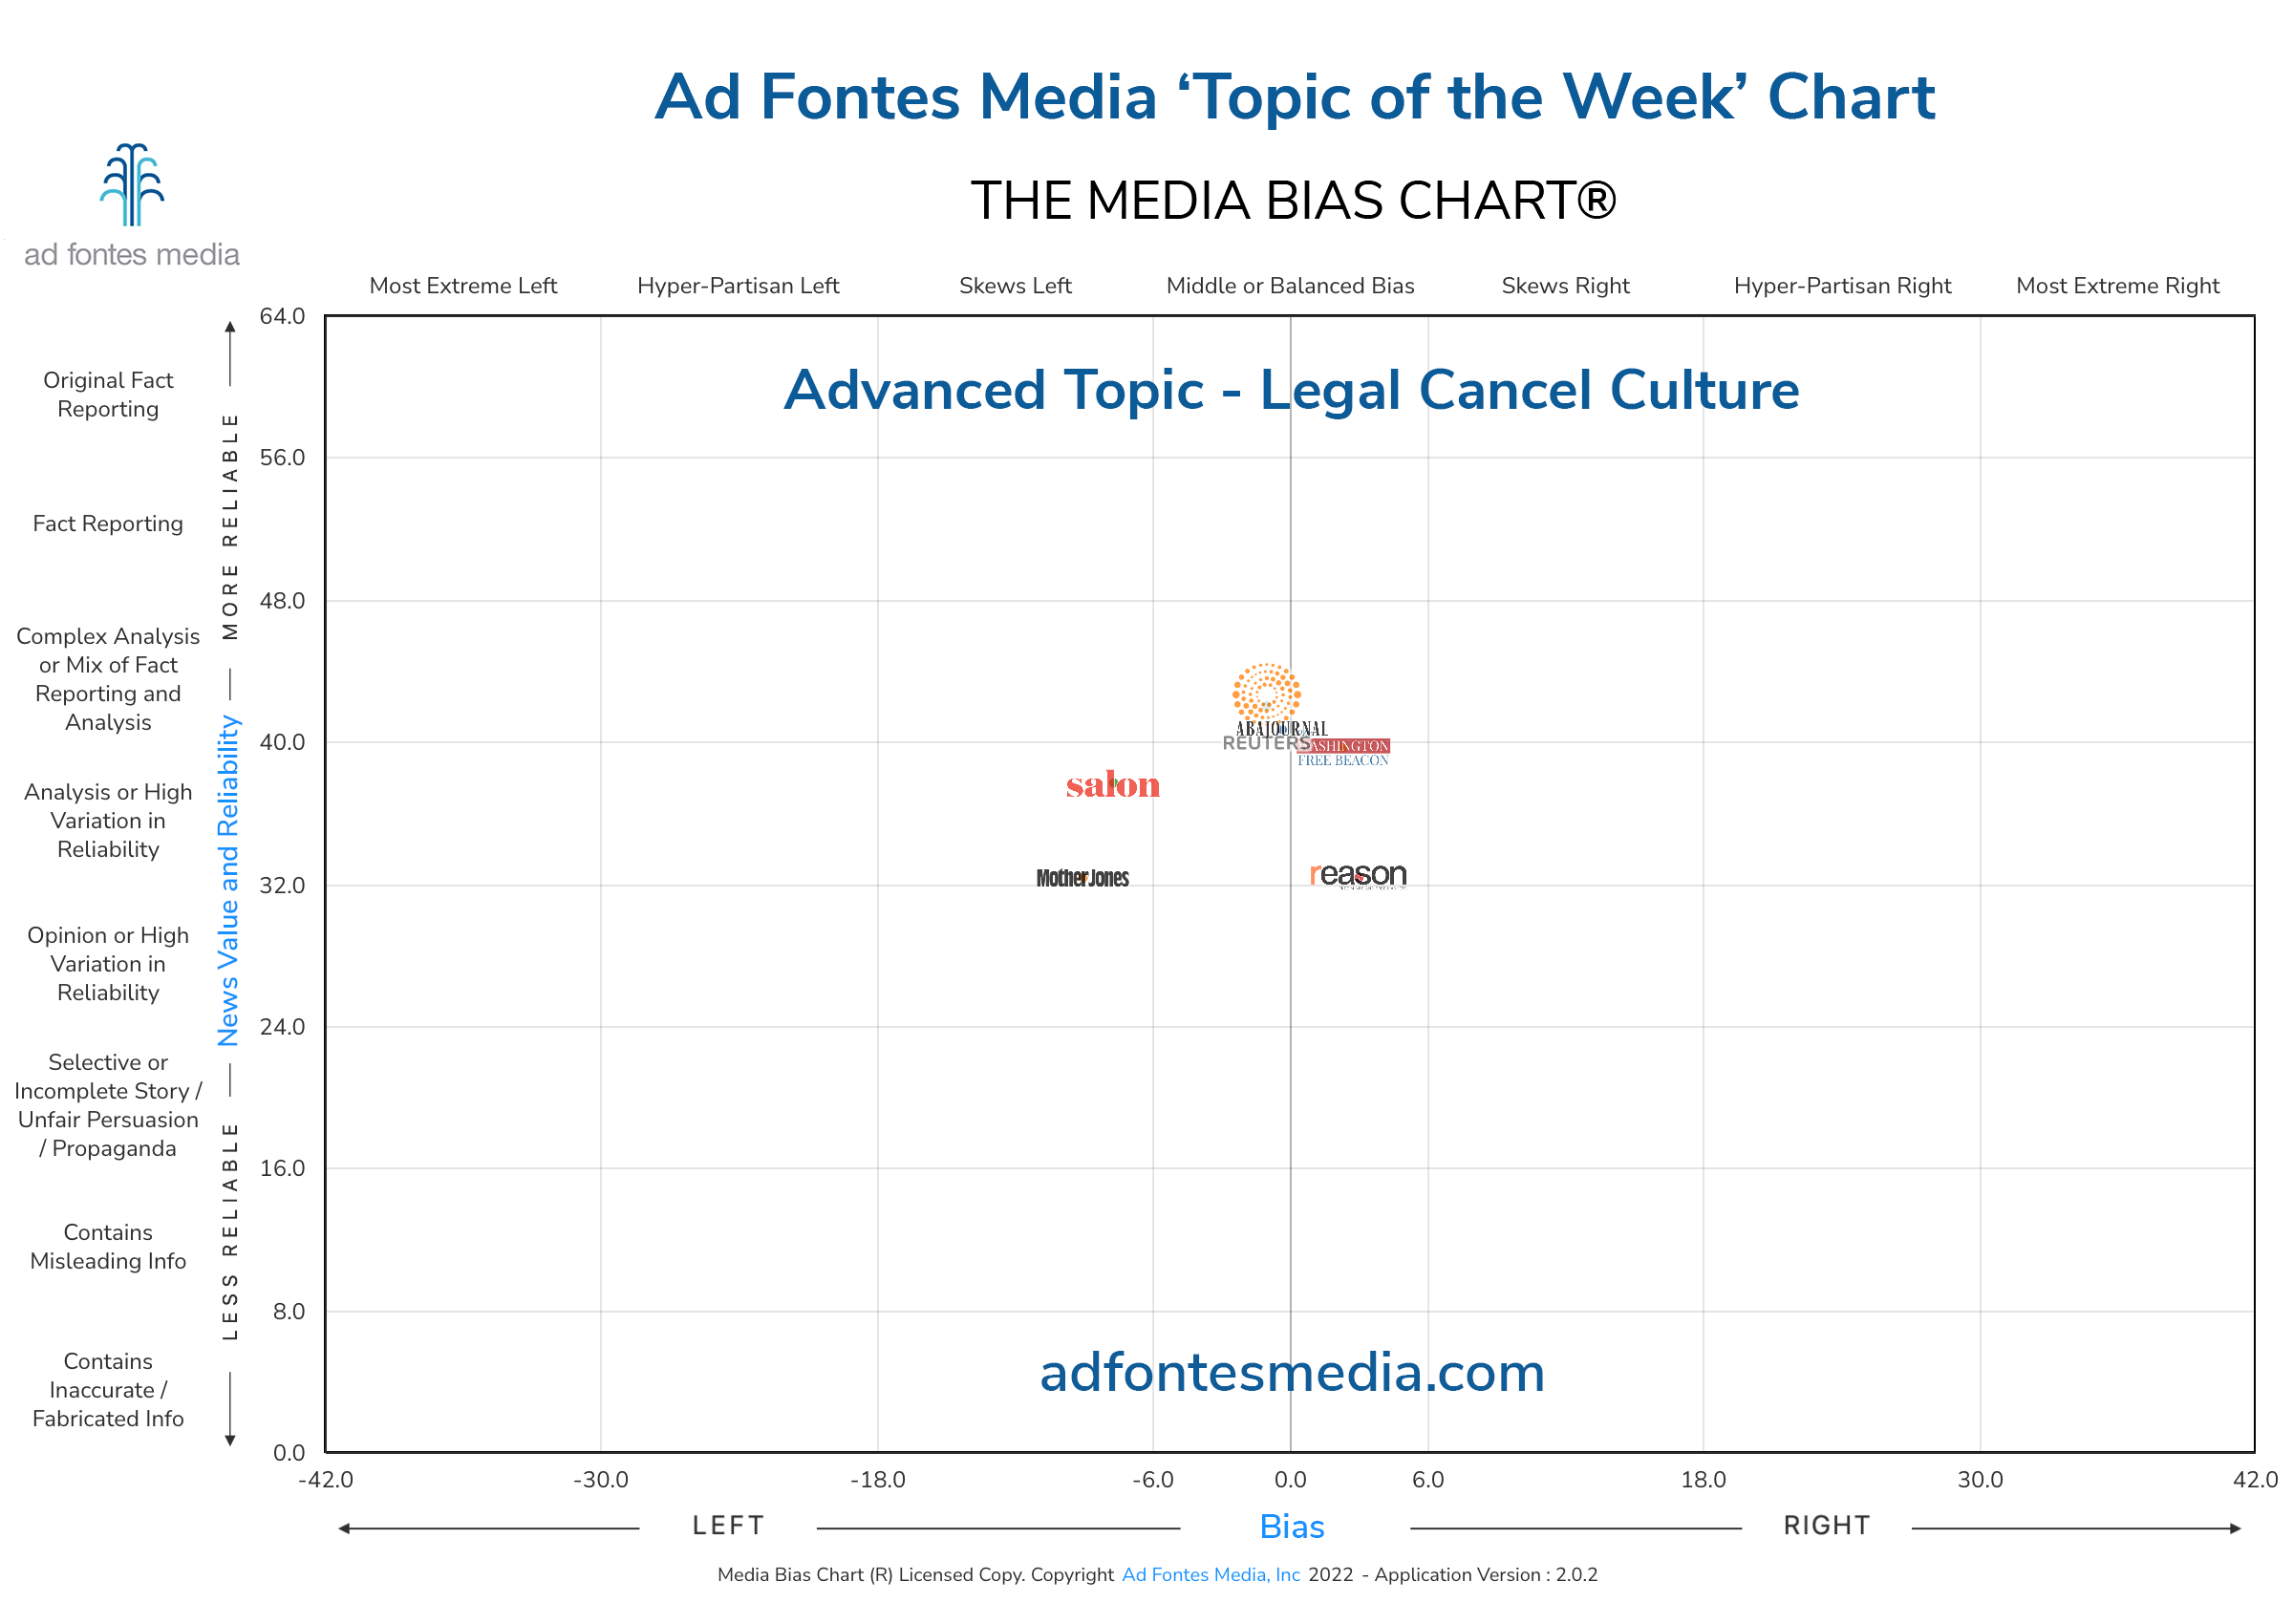 Scores of the Legal Cancel Culture articles on the chart